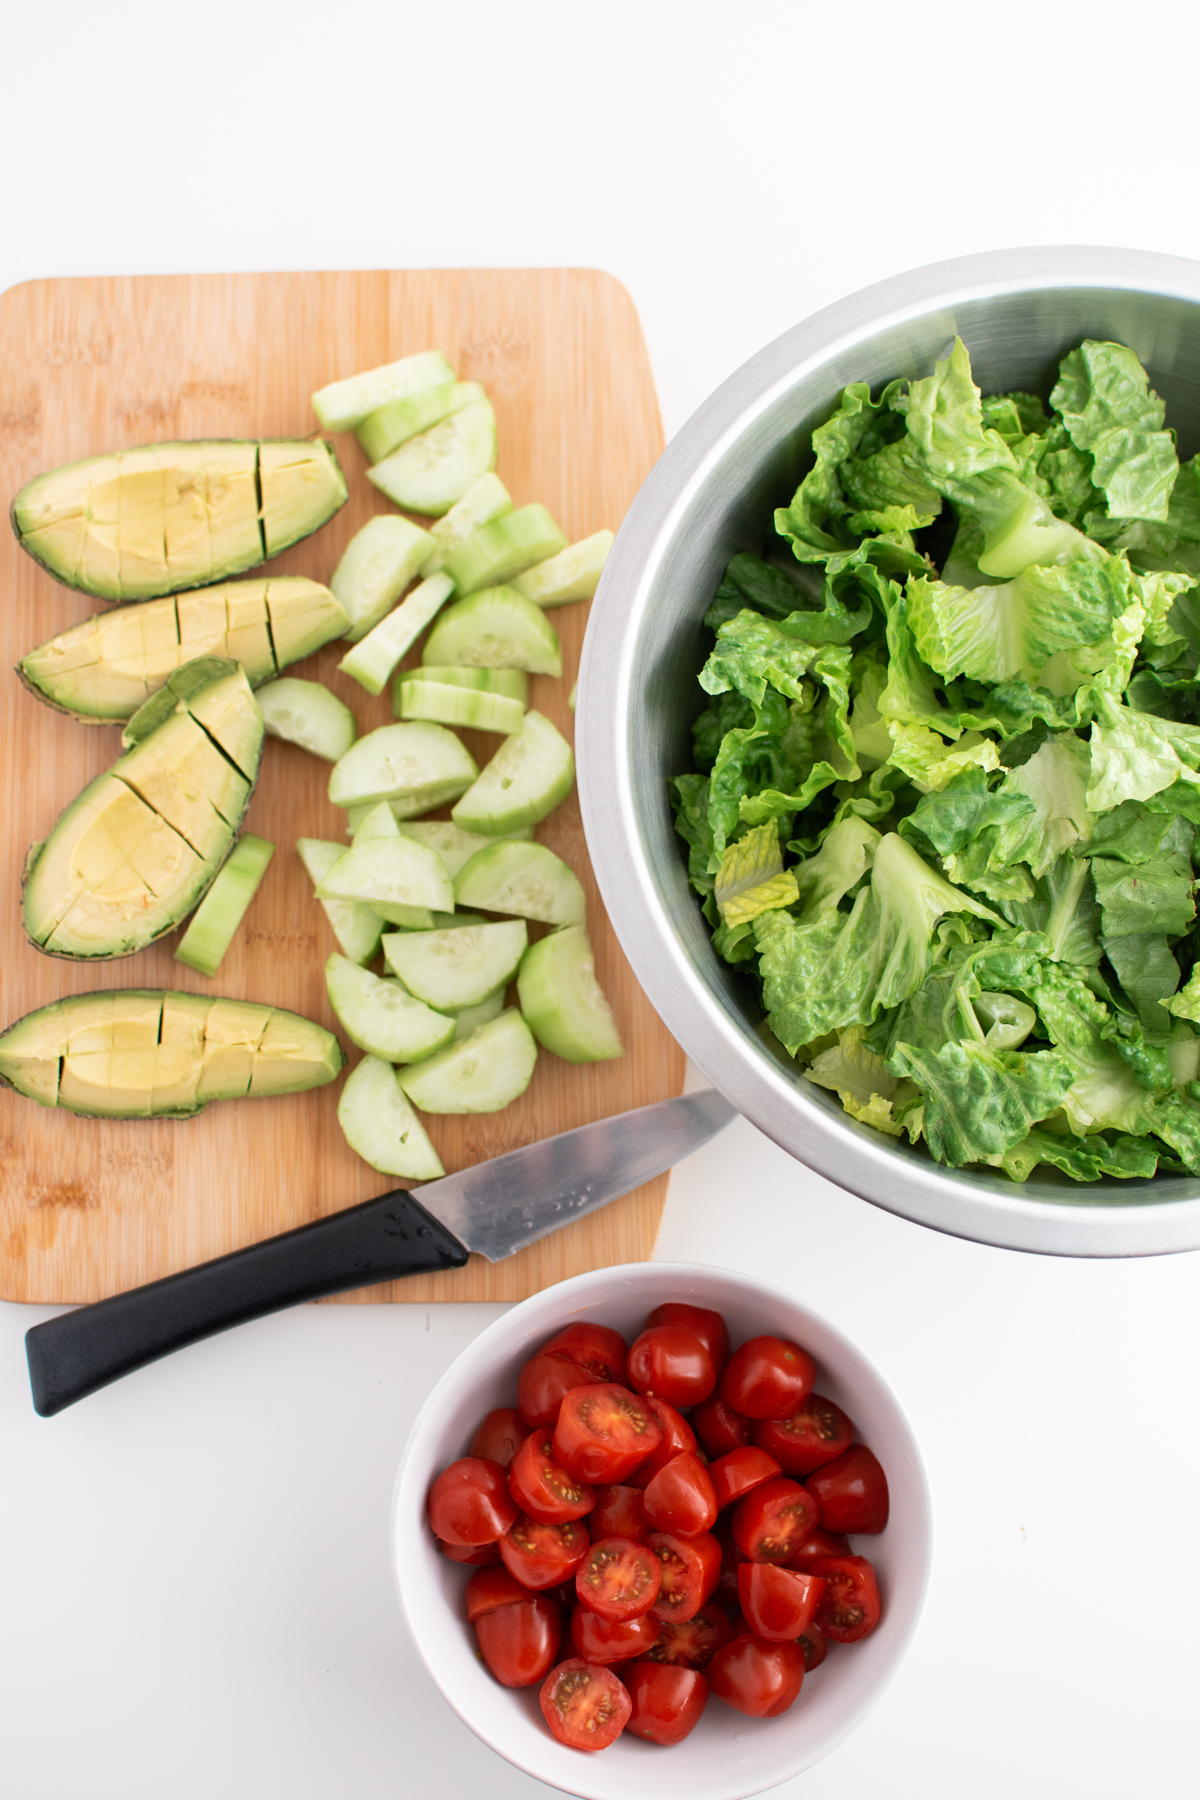 Chopped salad ingredients on white table, including lettuce, tomato and avocado.